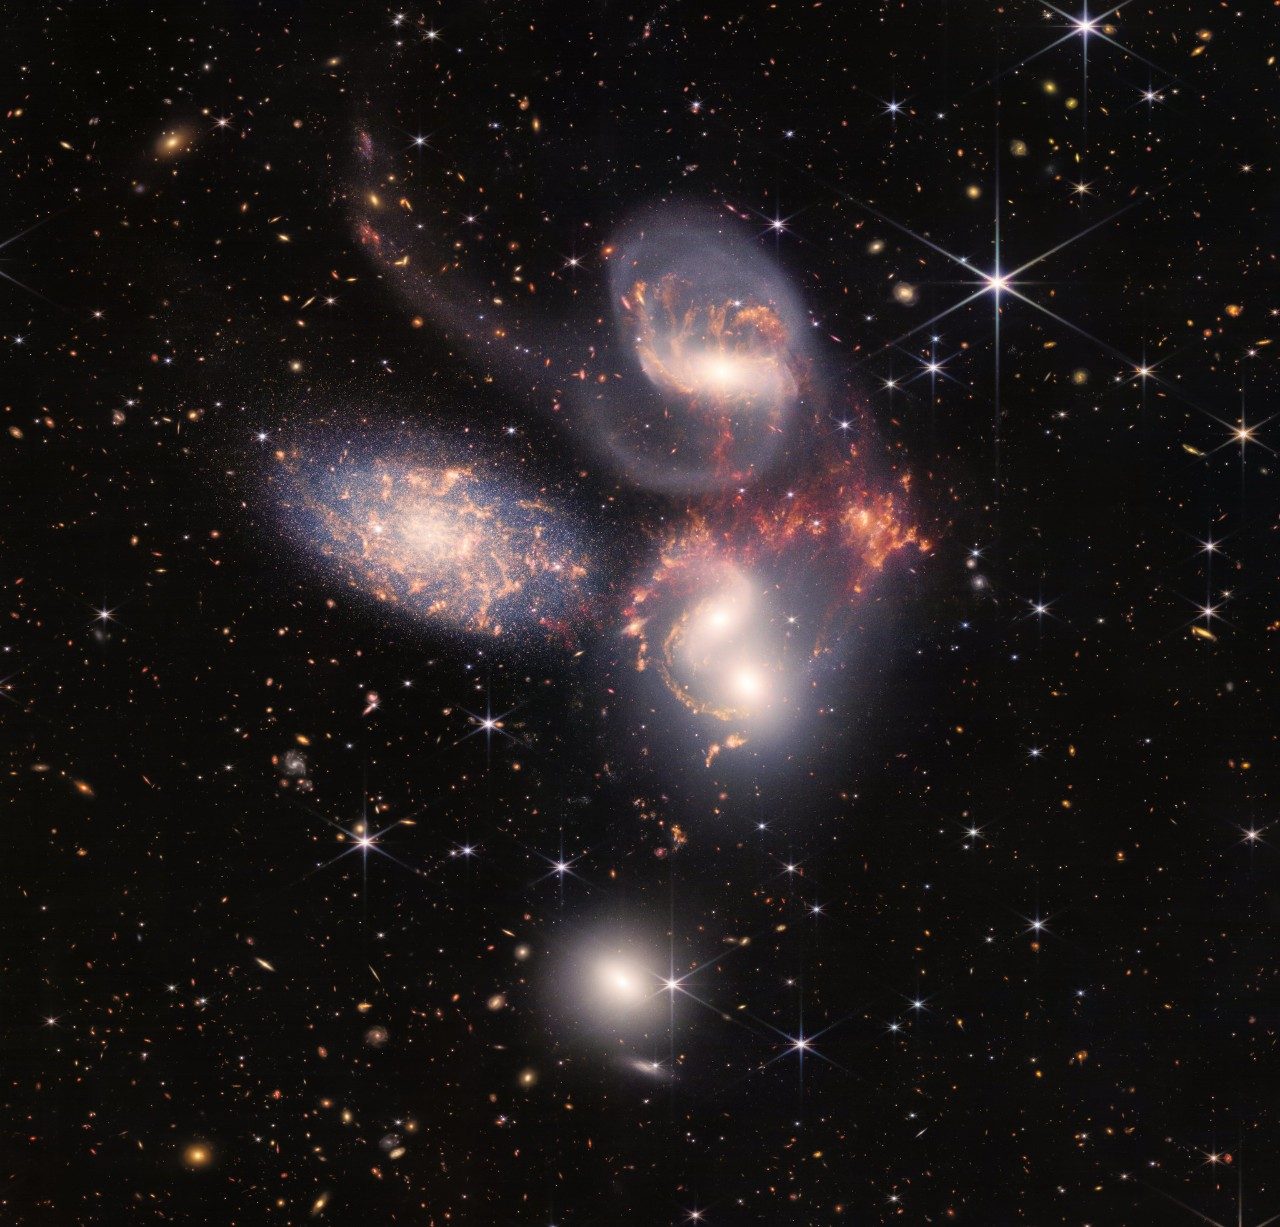 Stephan's Quintet - Five galaxies in a group